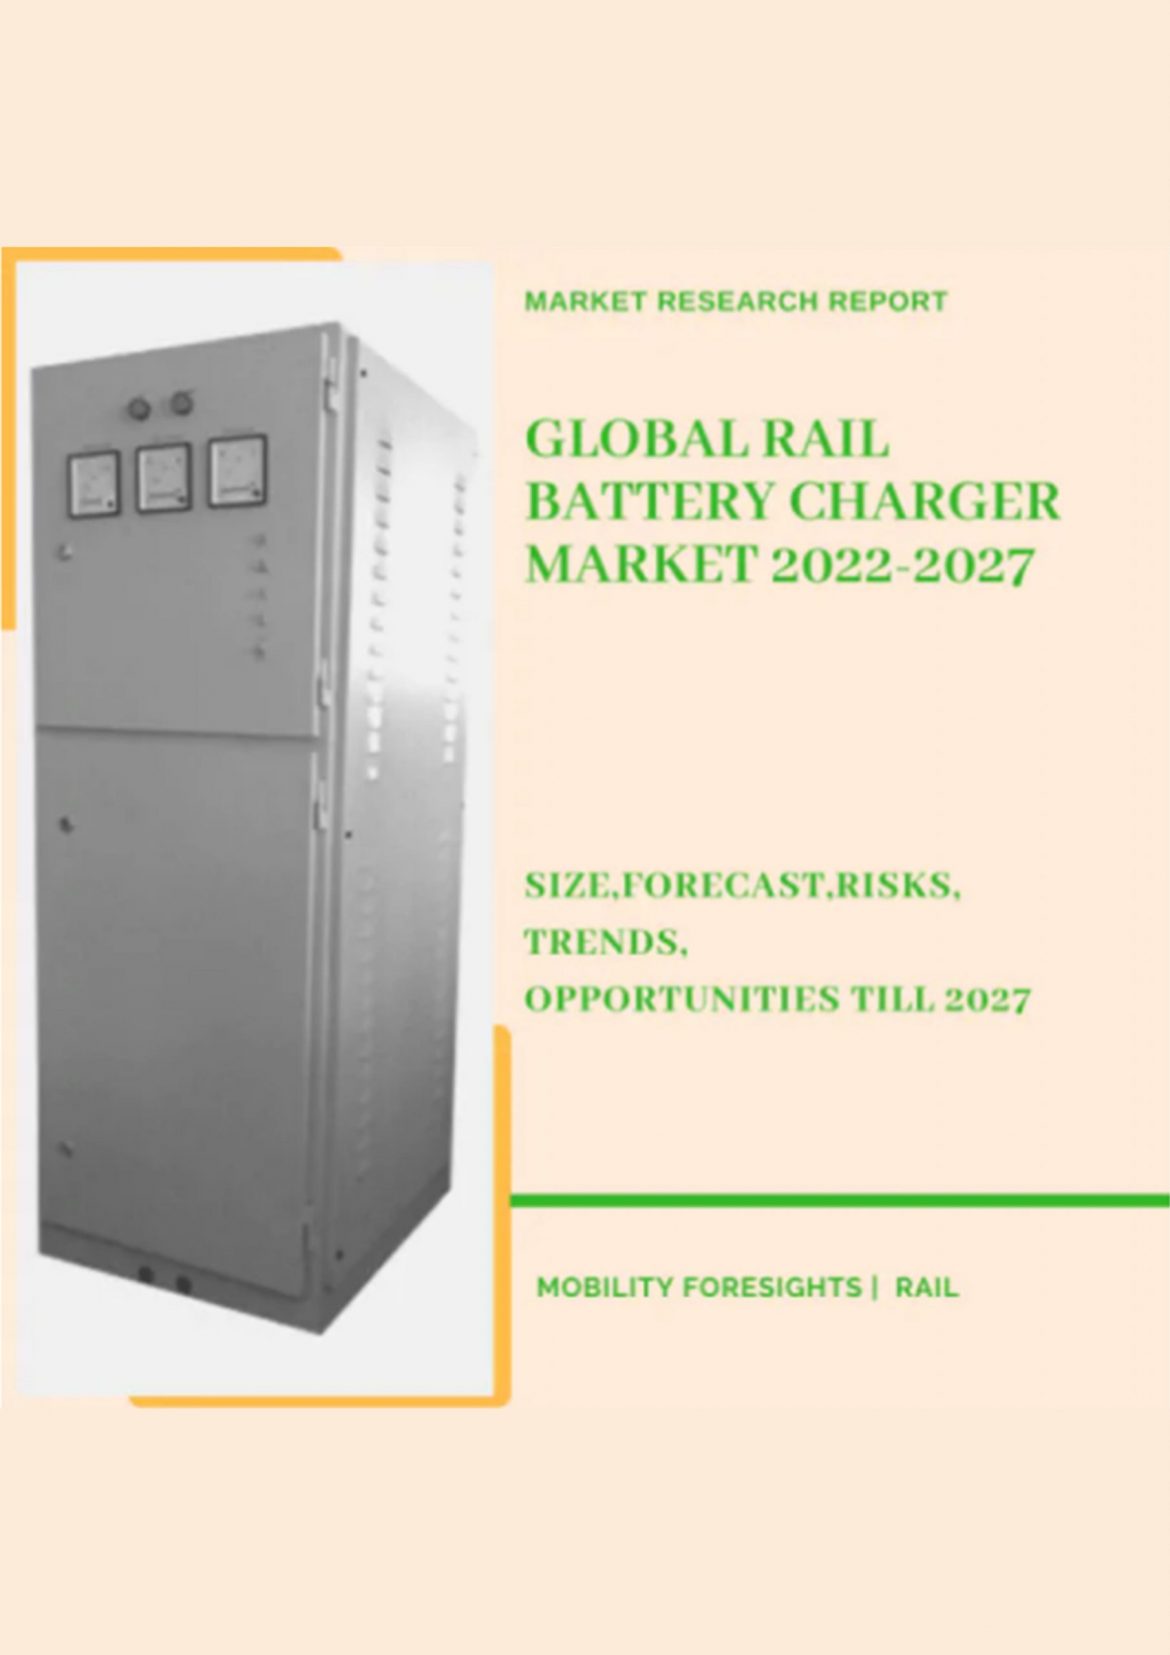 Global Rail Battery Charger Market 2022-2027